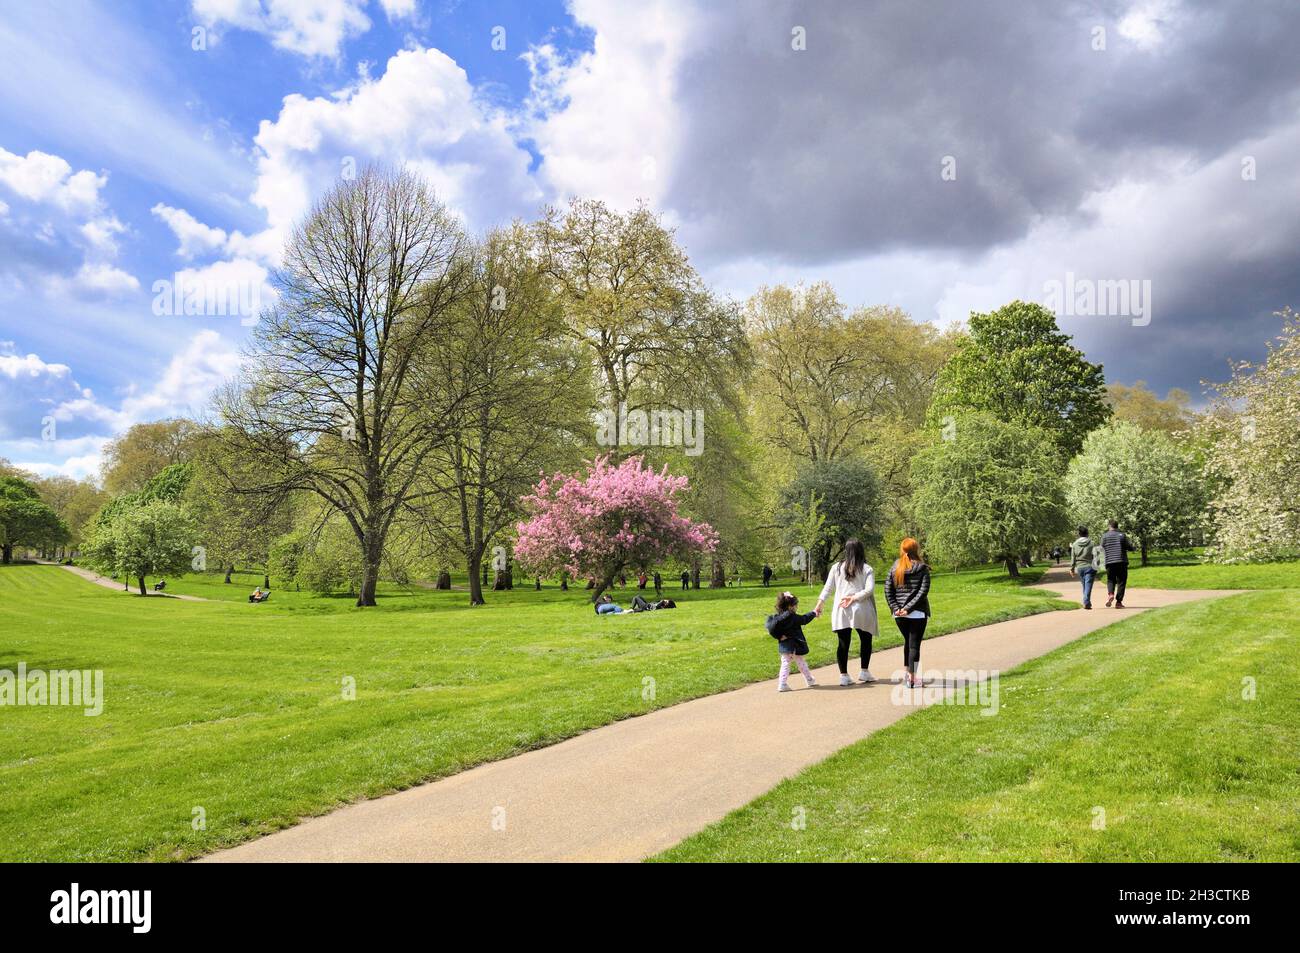 People walking in The Green Park on a fine spring day, London, England, UK Stock Photo